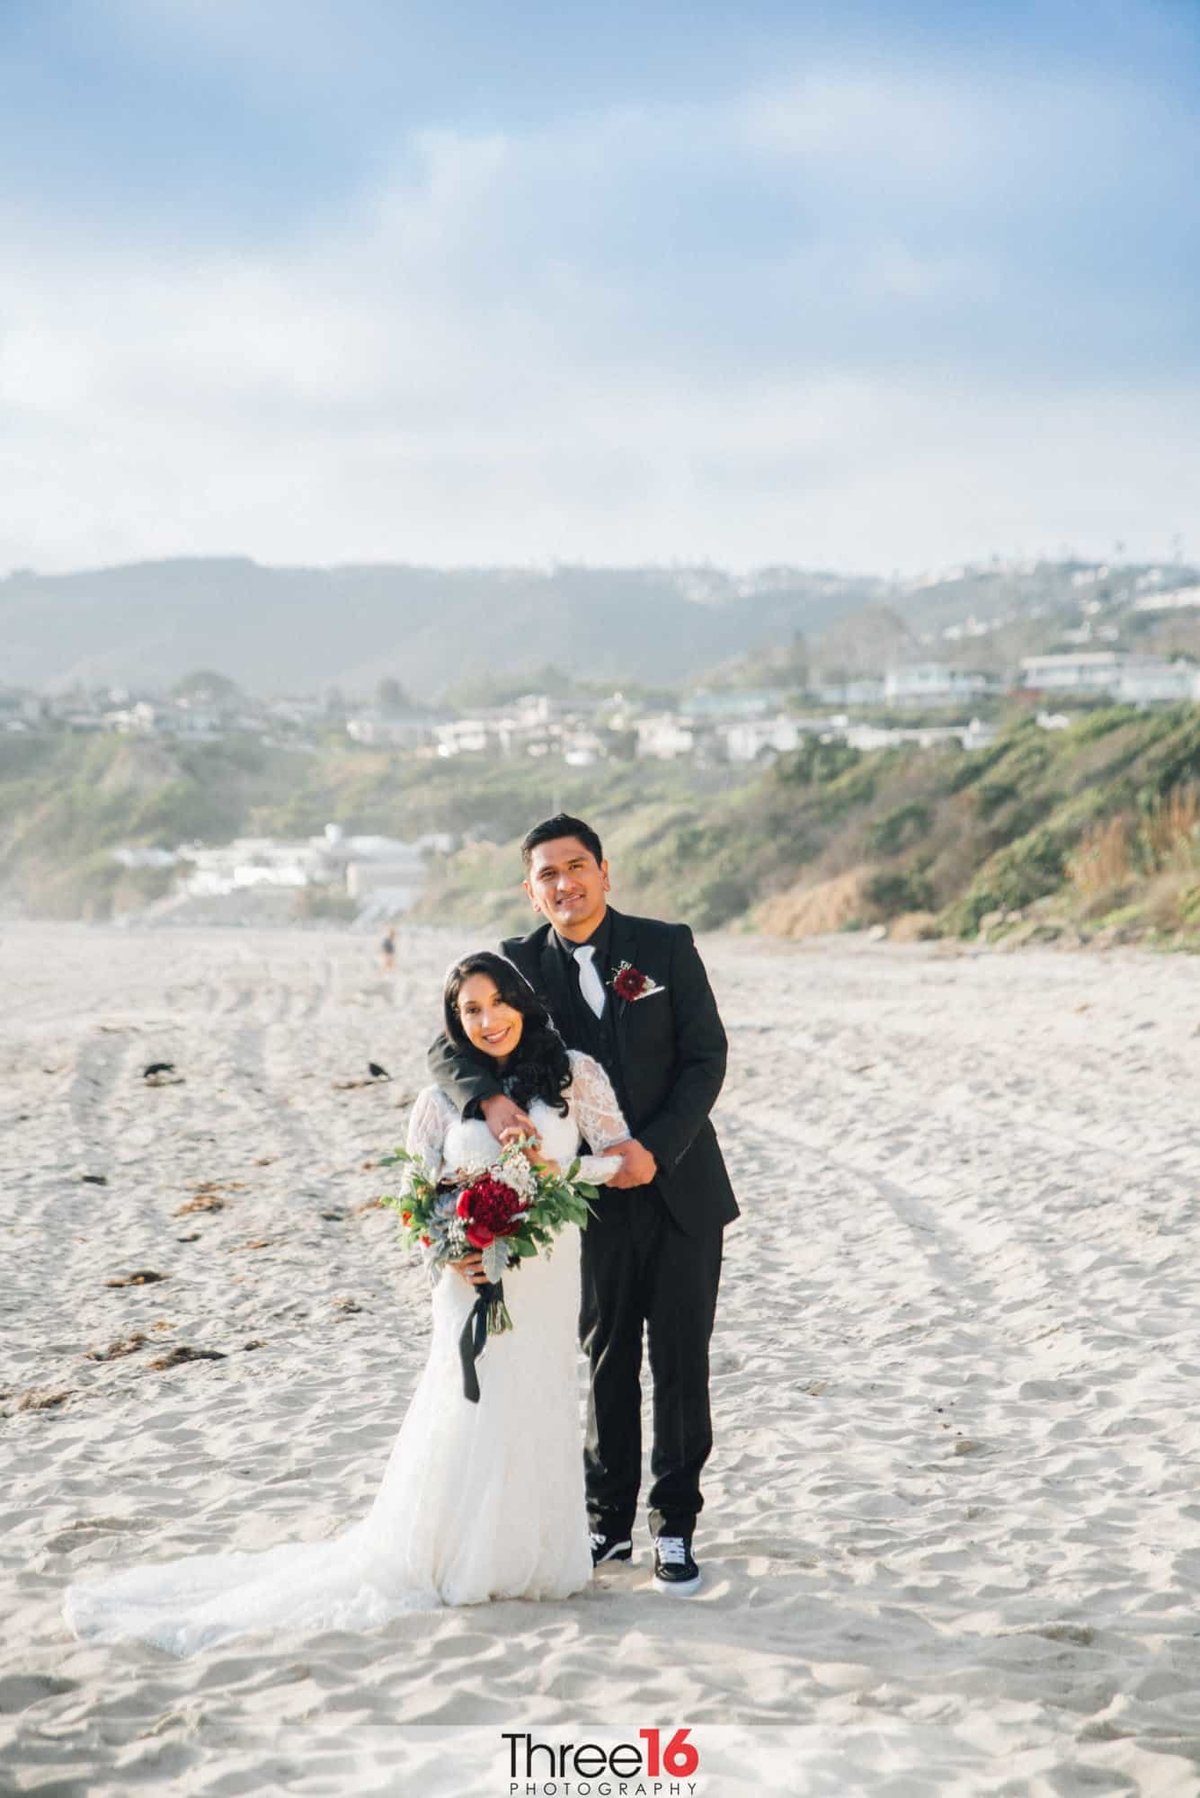 Groom embraces his Bride from behind while standing on the sands of Salt Creek Beach in Dana Point